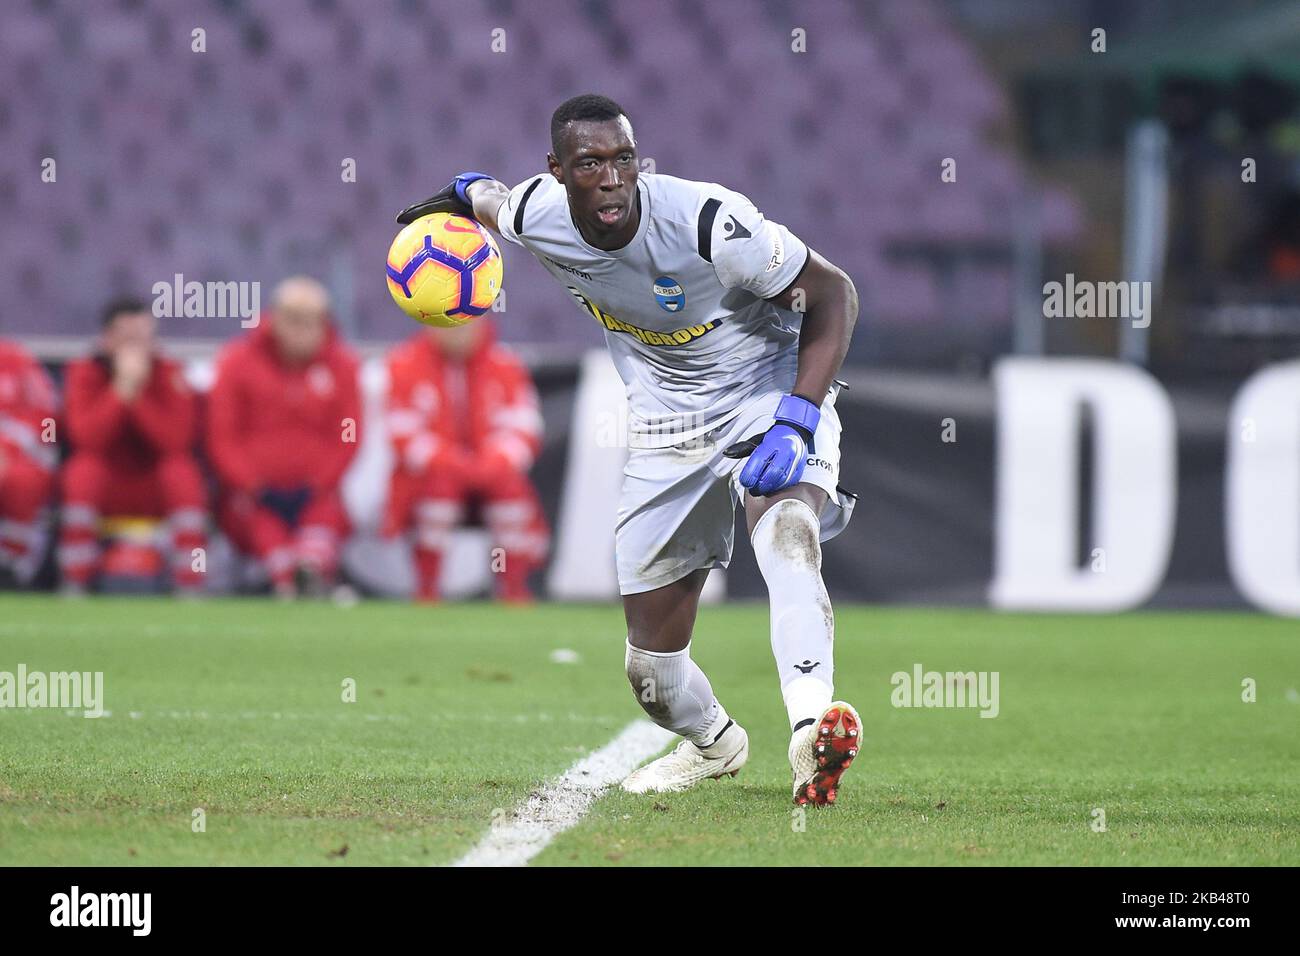 Alfred Gomis of Spal during the Serie A TIM match between SSC Napoli and Spal at Stadio San Paolo Naples Italy on 22 December 2018. (Photo Franco Romano) Stock Photo